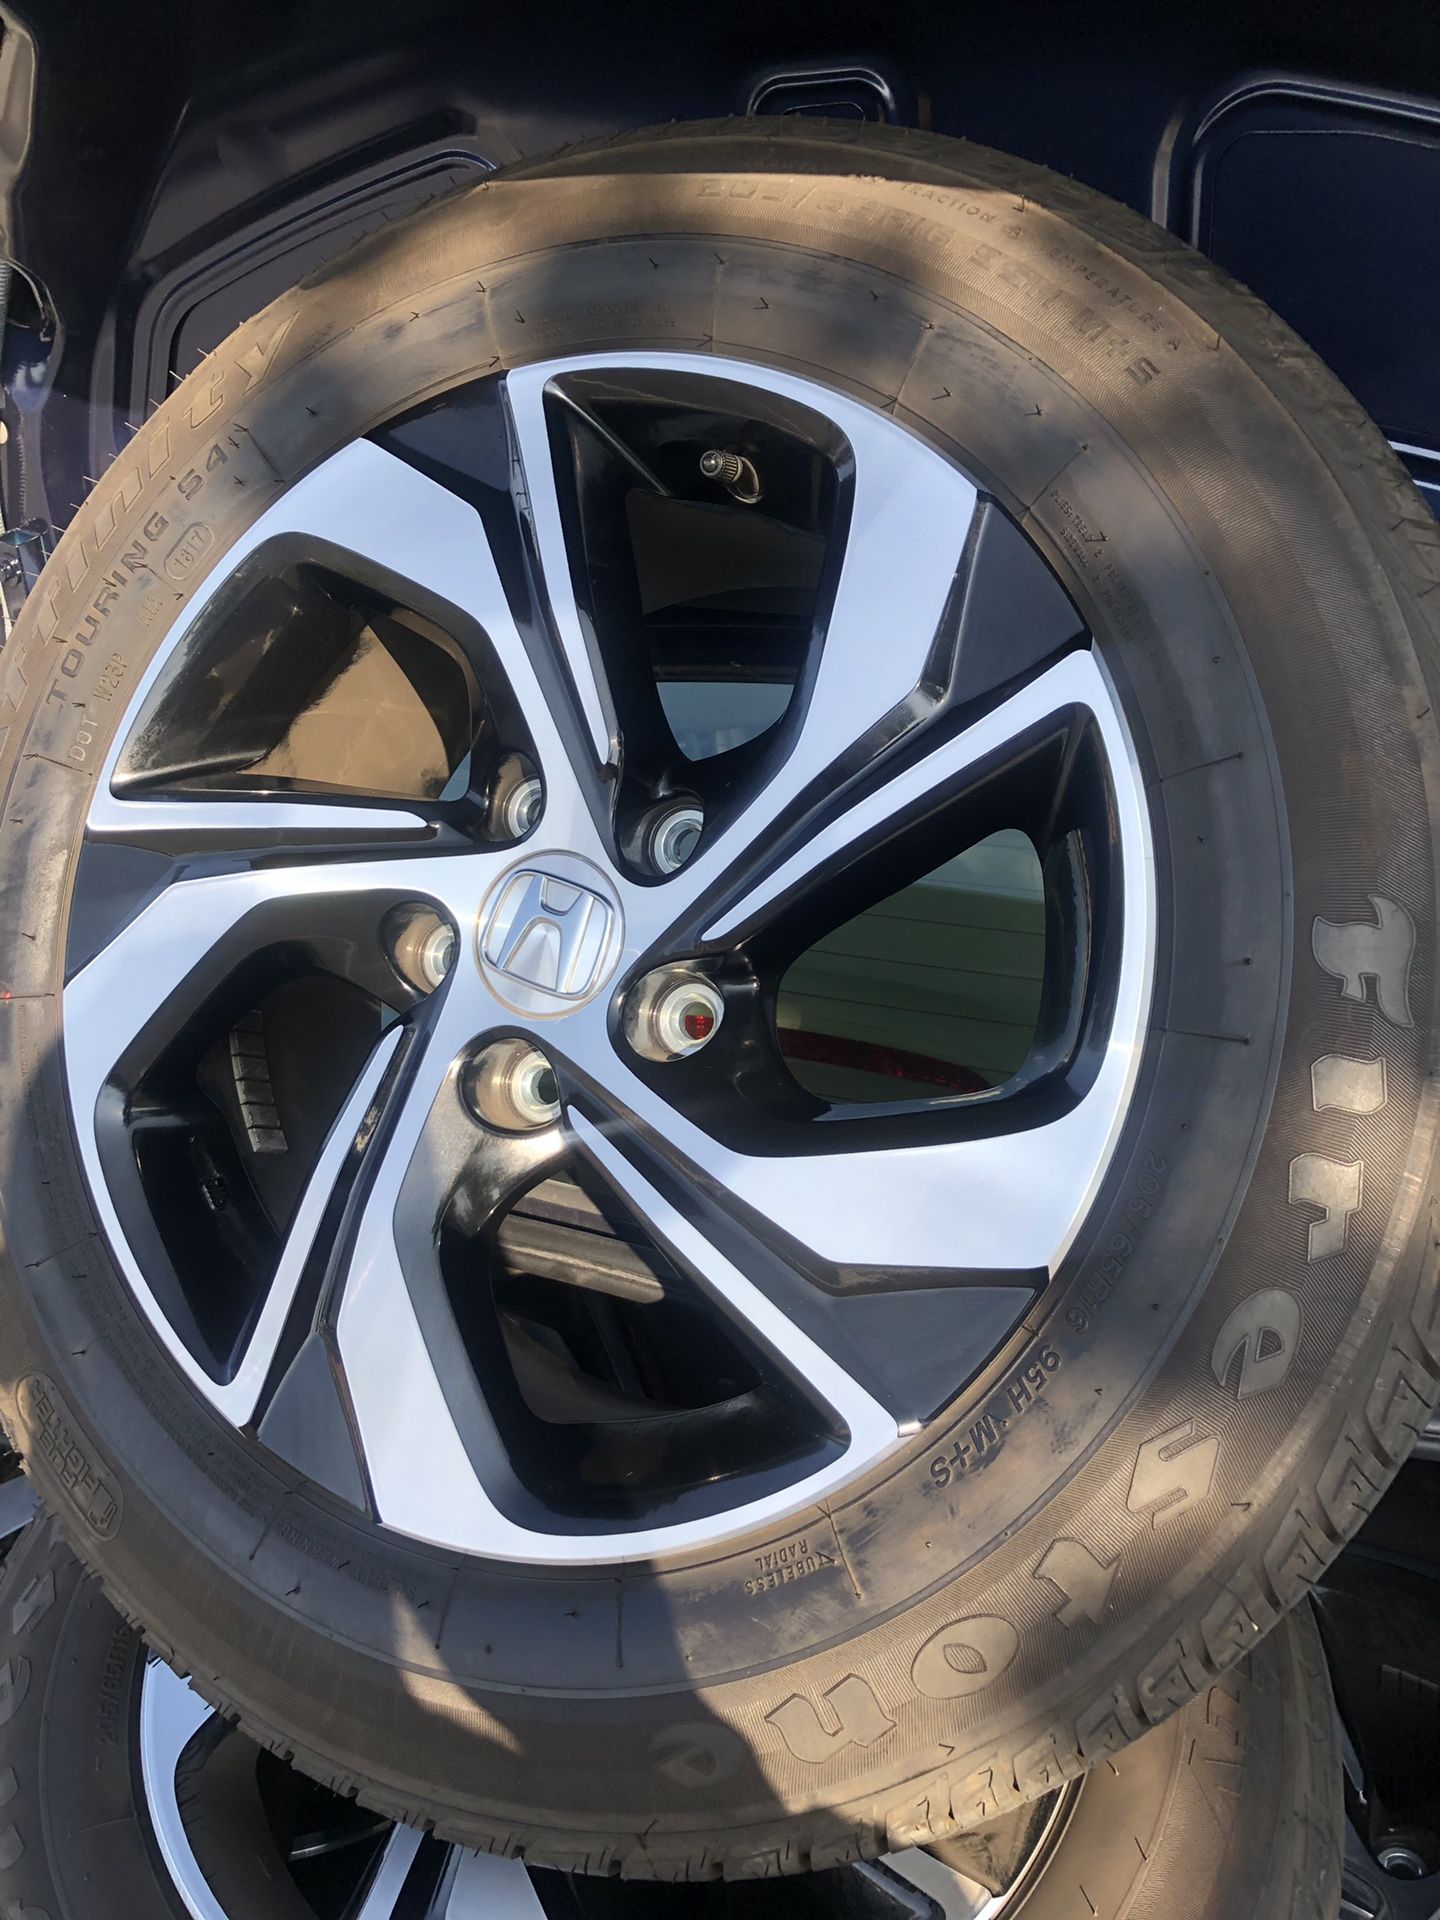 Rims and tires 16 5x114 for Honda Acord civic Acura CRV 90% on tires no scratches rims and tires like new